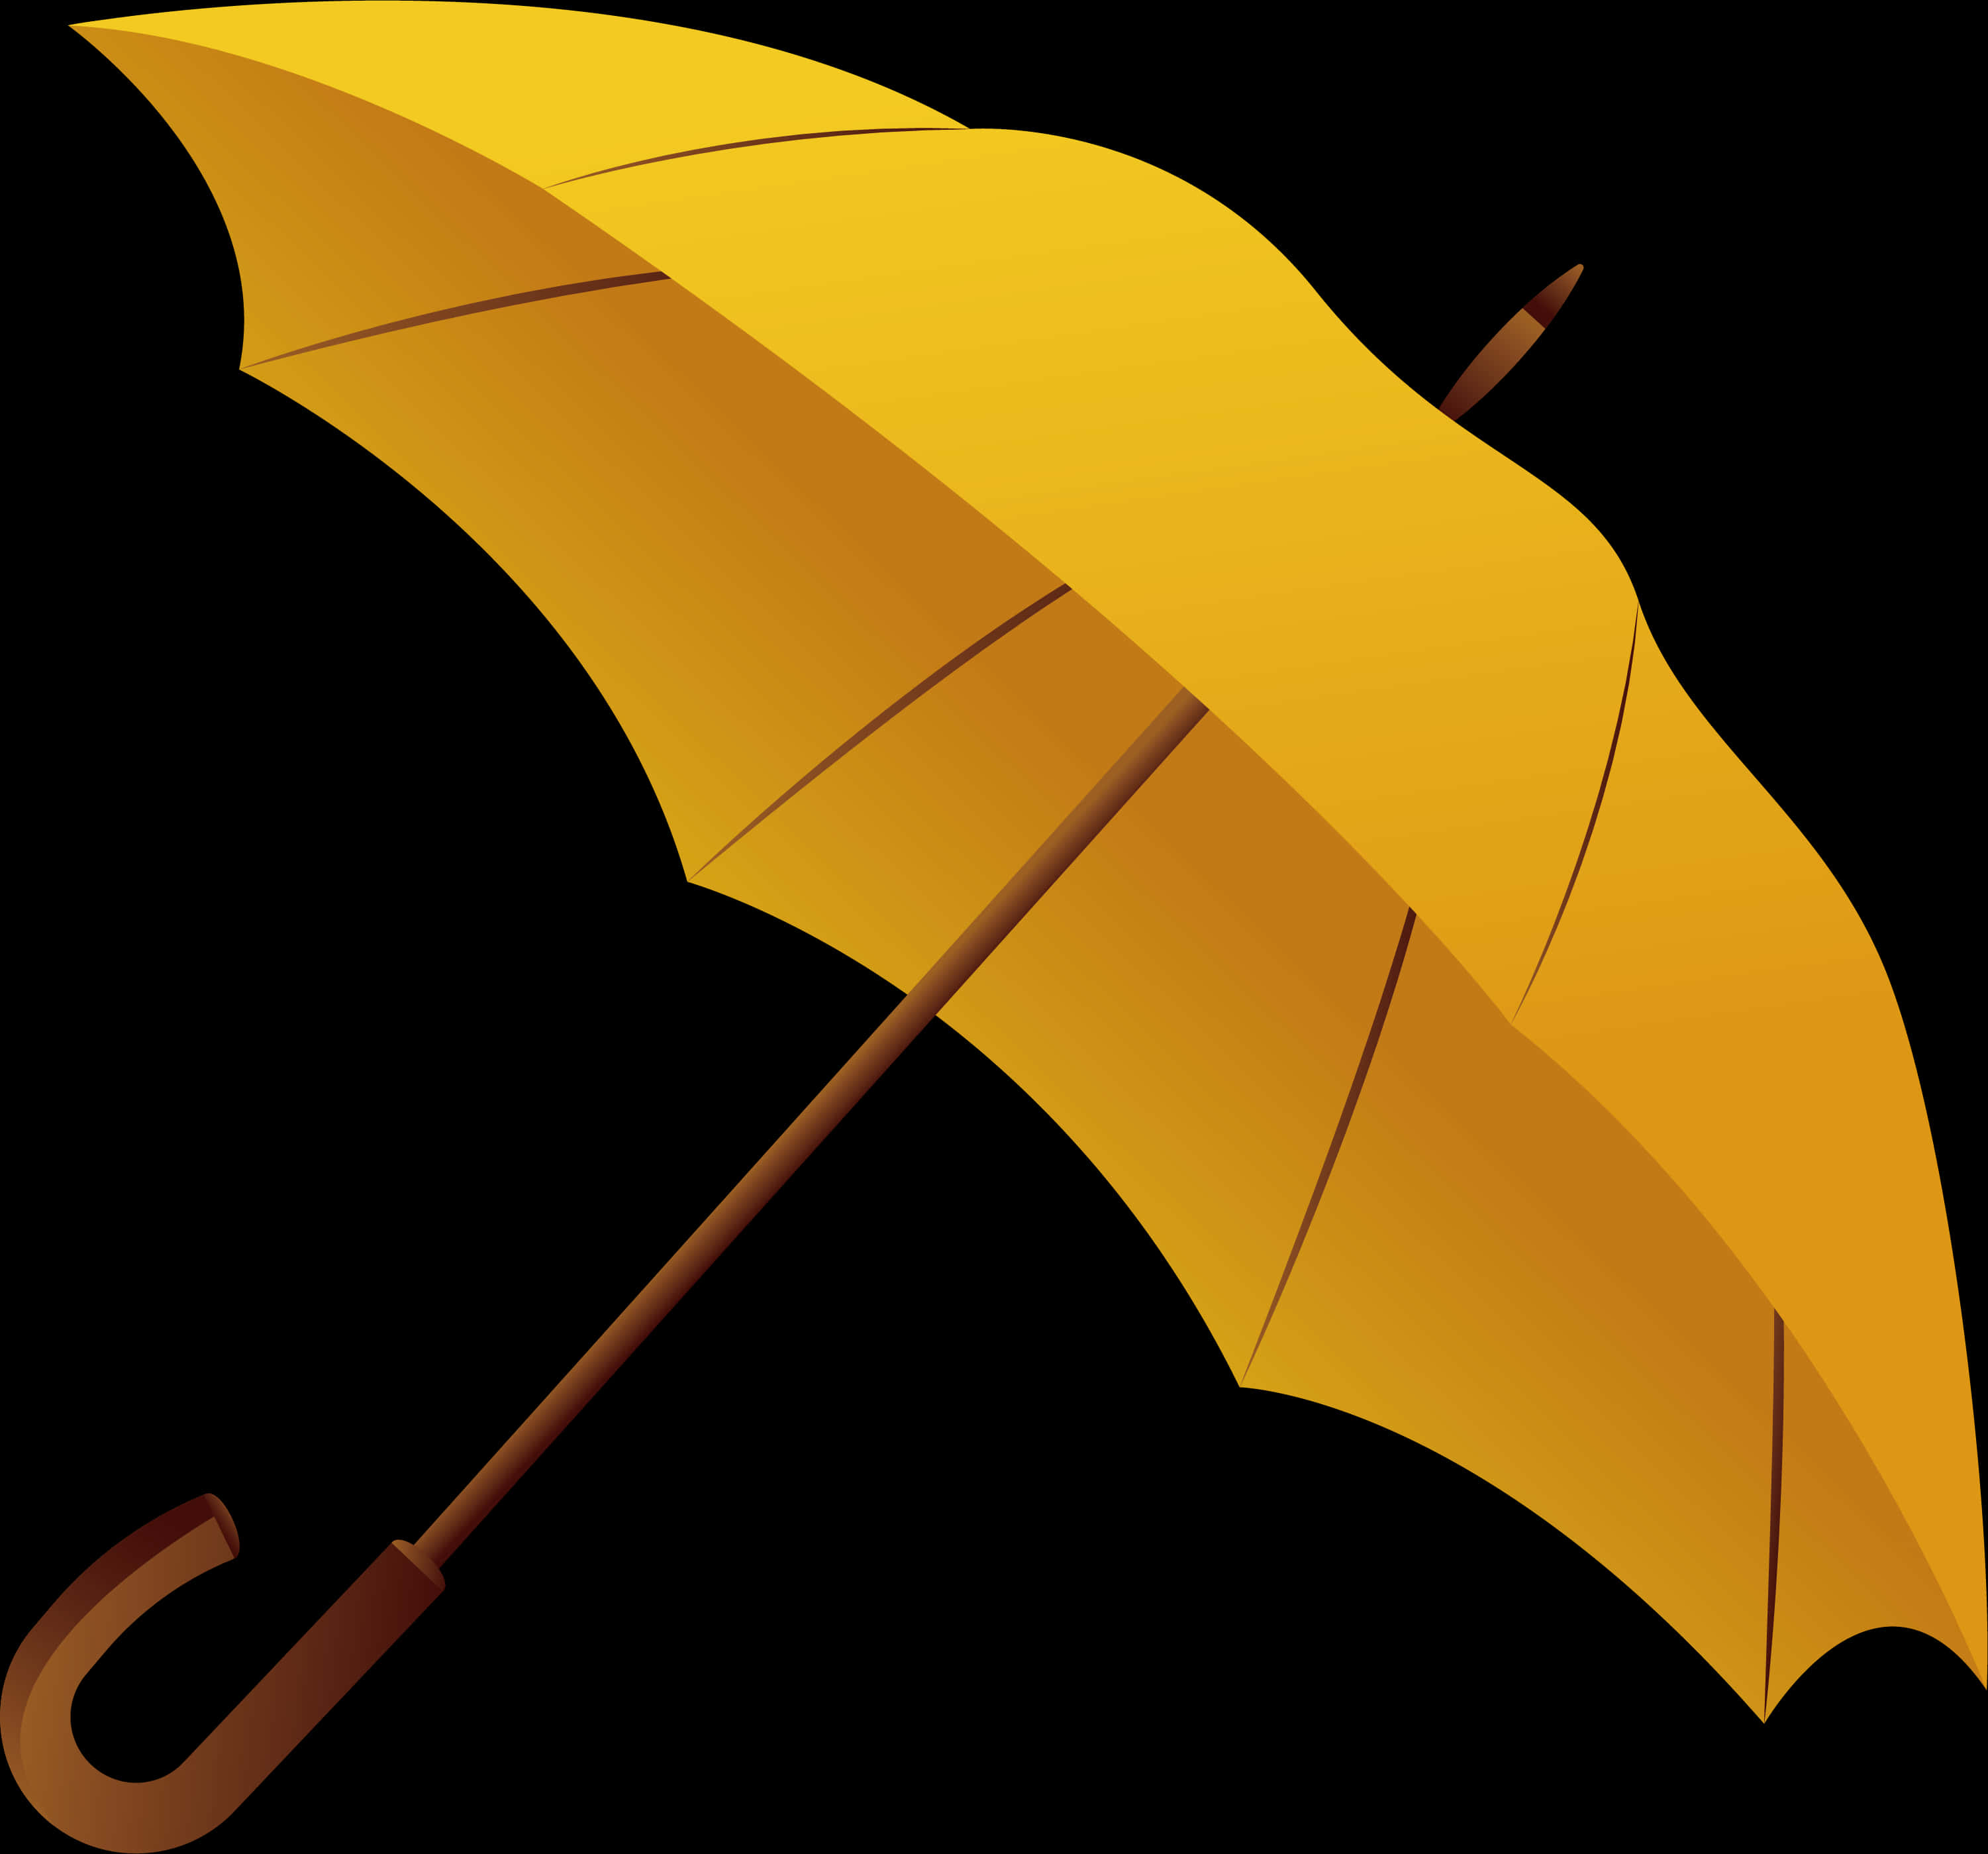 A Yellow Umbrella With A Wooden Handle